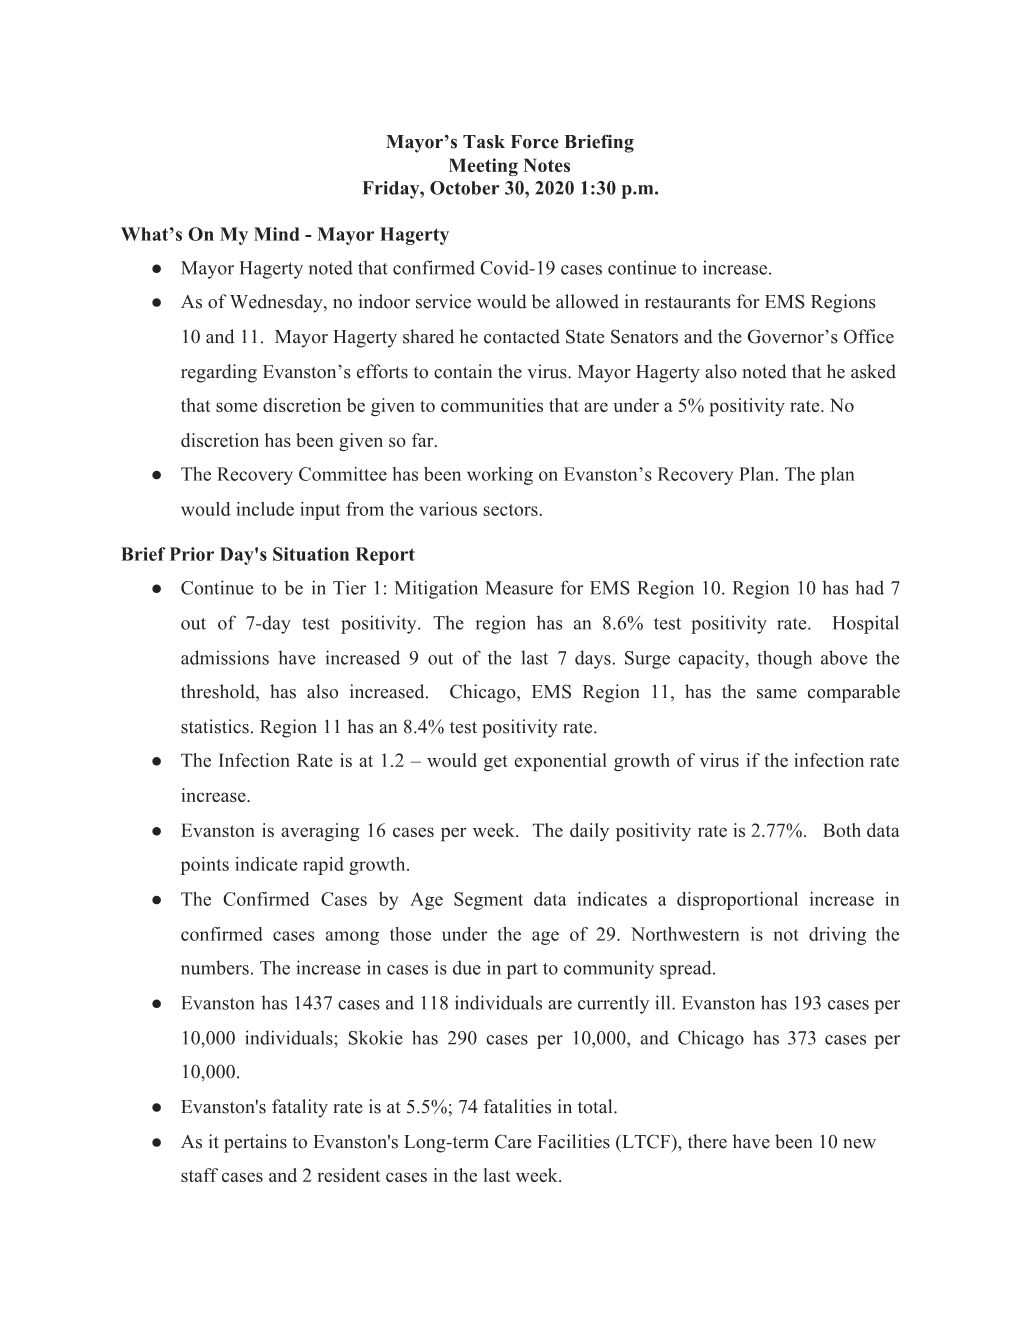 Mayor's Task Force Briefing Meeting Notes Friday, October 30, 2020 1